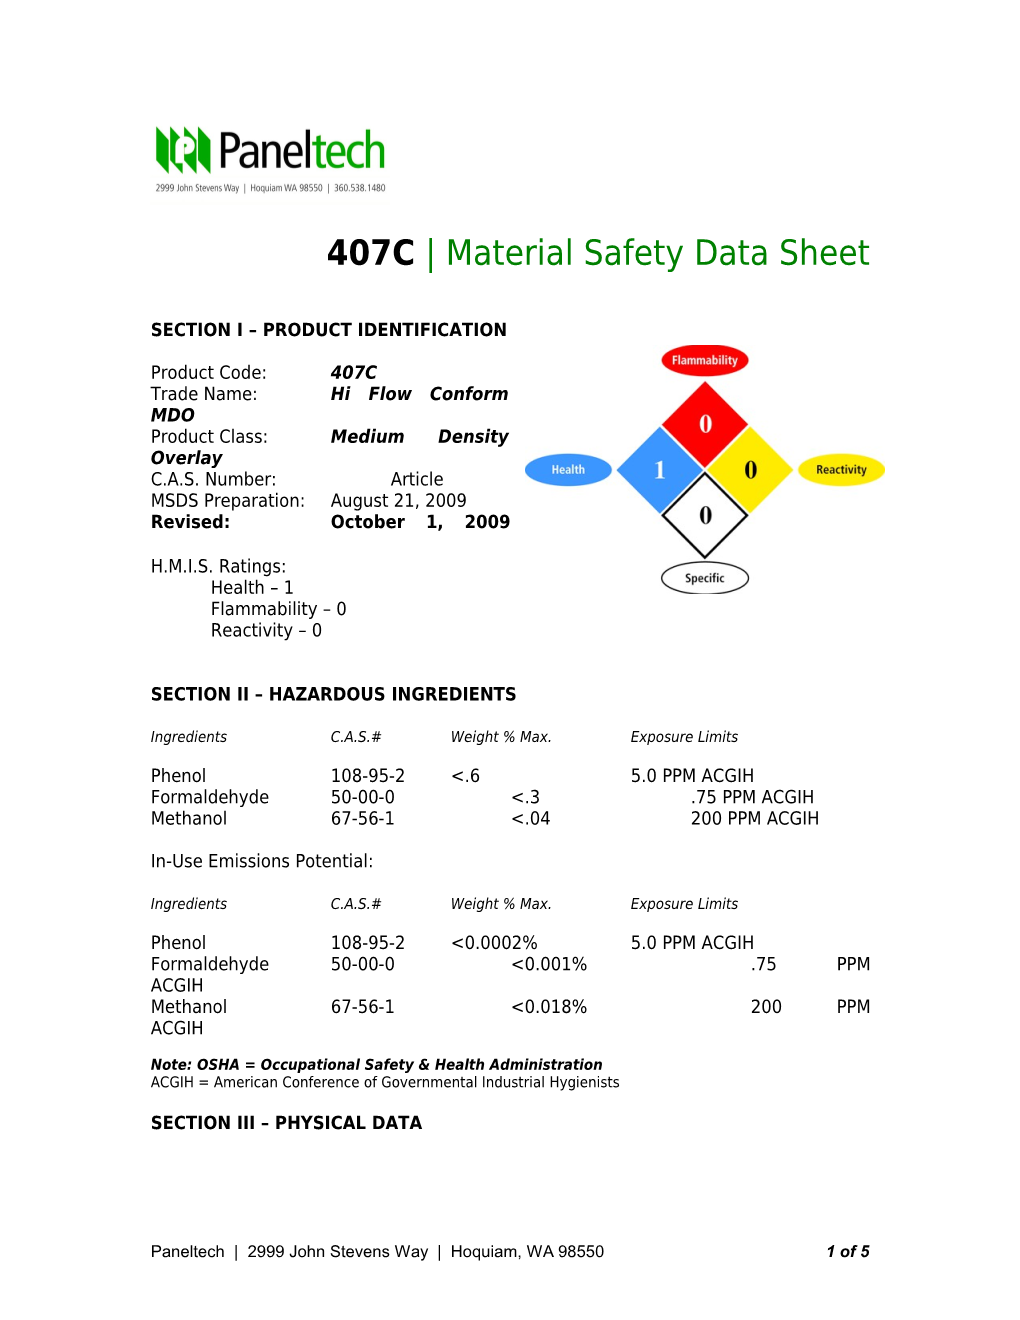 407C Material Safety Data Sheet